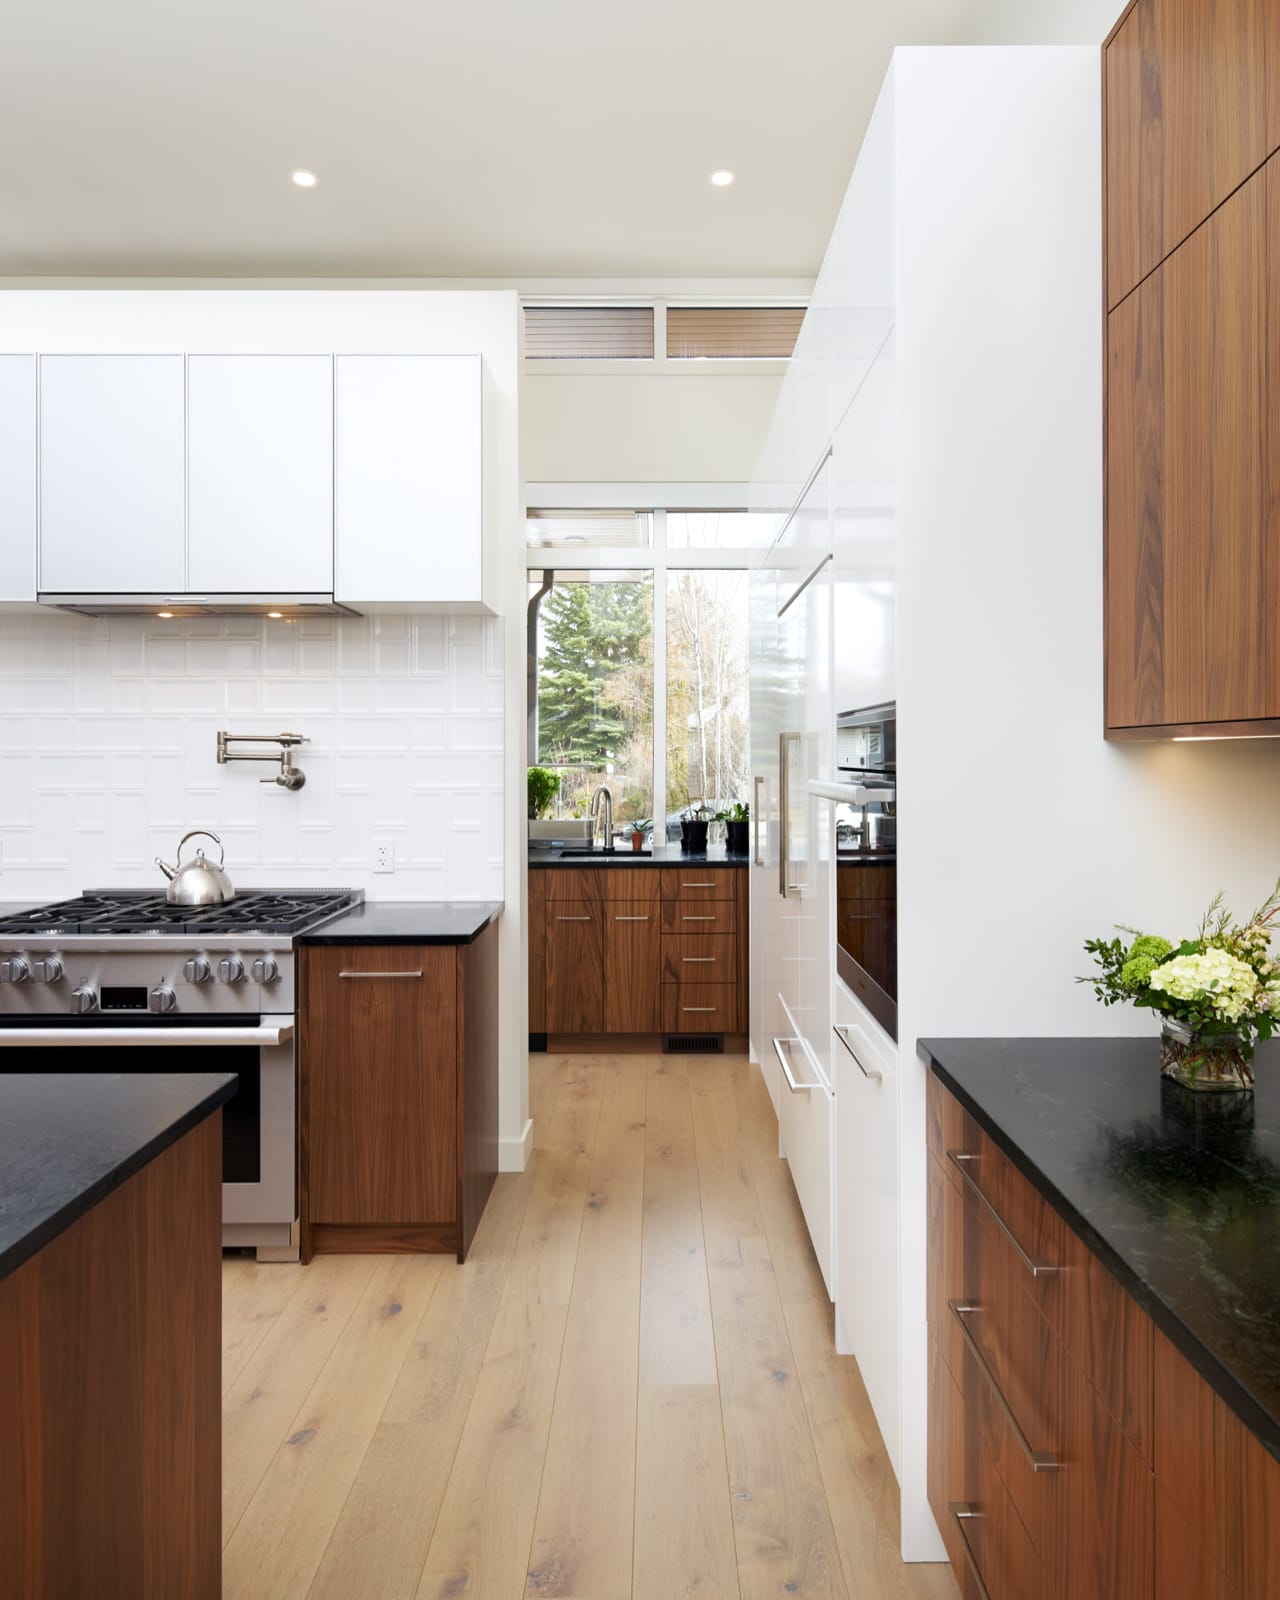 Black countertops and simple hardware add to the minimalist design of this kitchen.